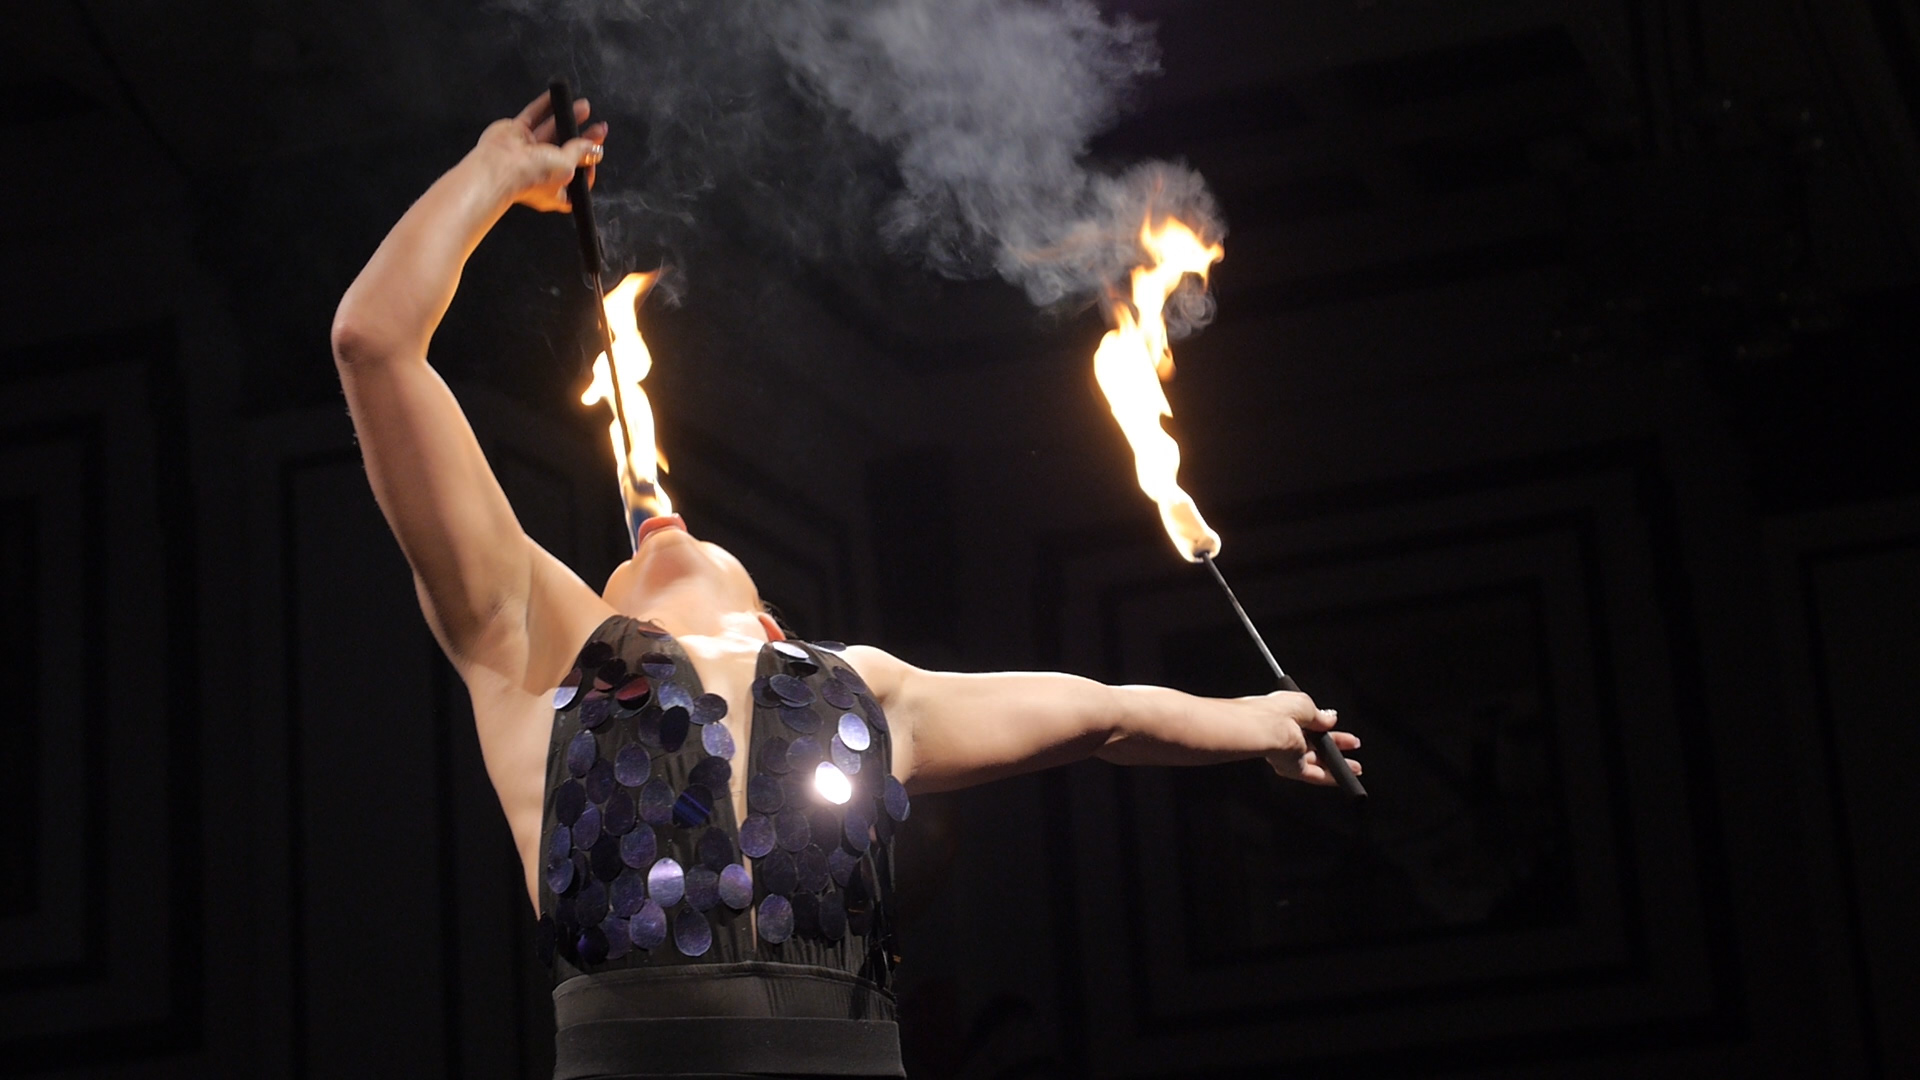 A still of a girl eating fire in a promotional video